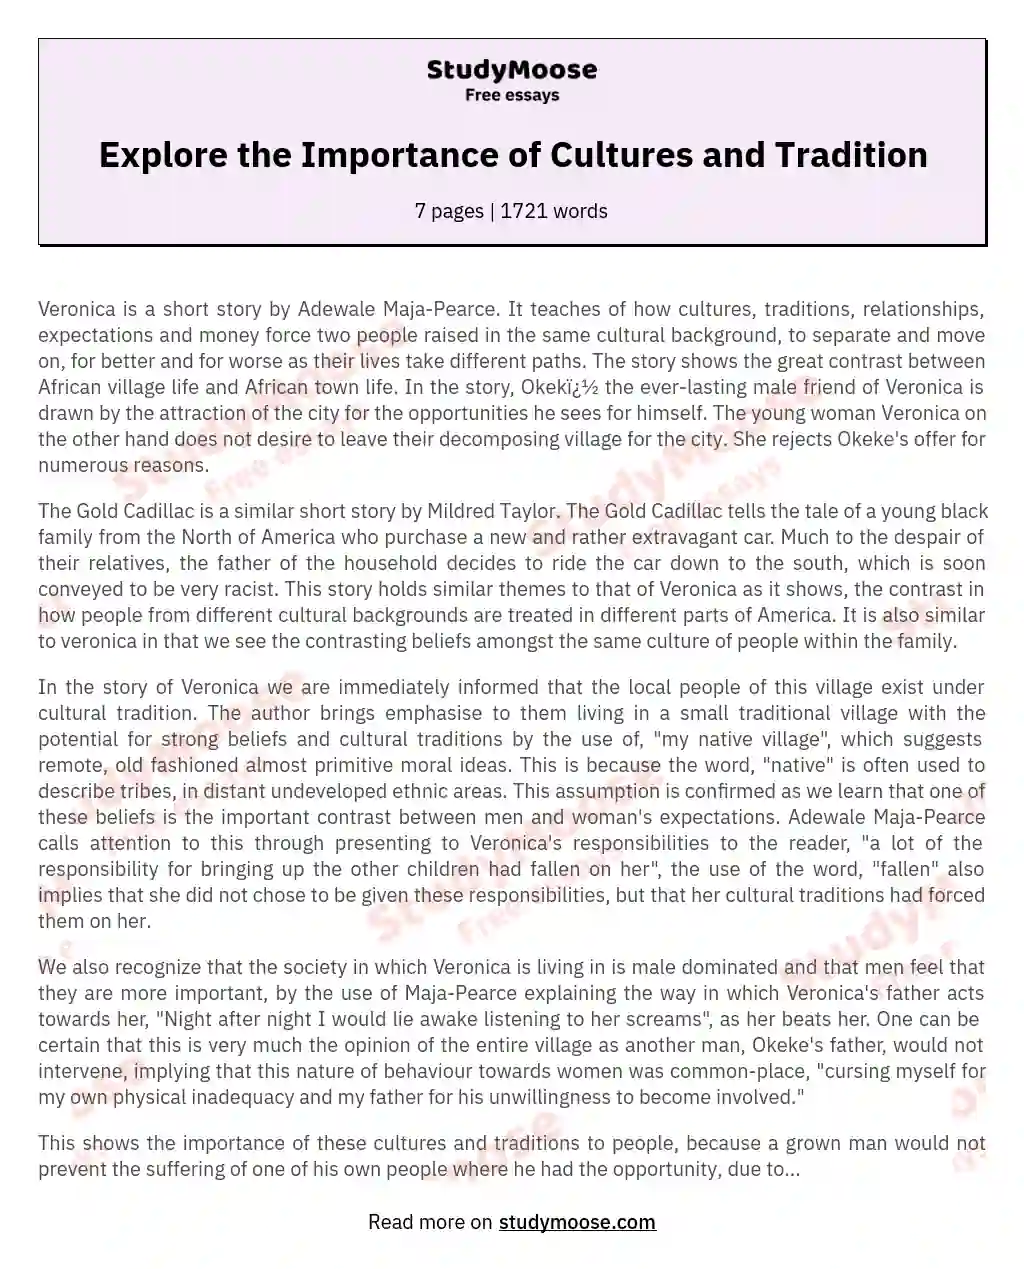 essay about an traditional culture